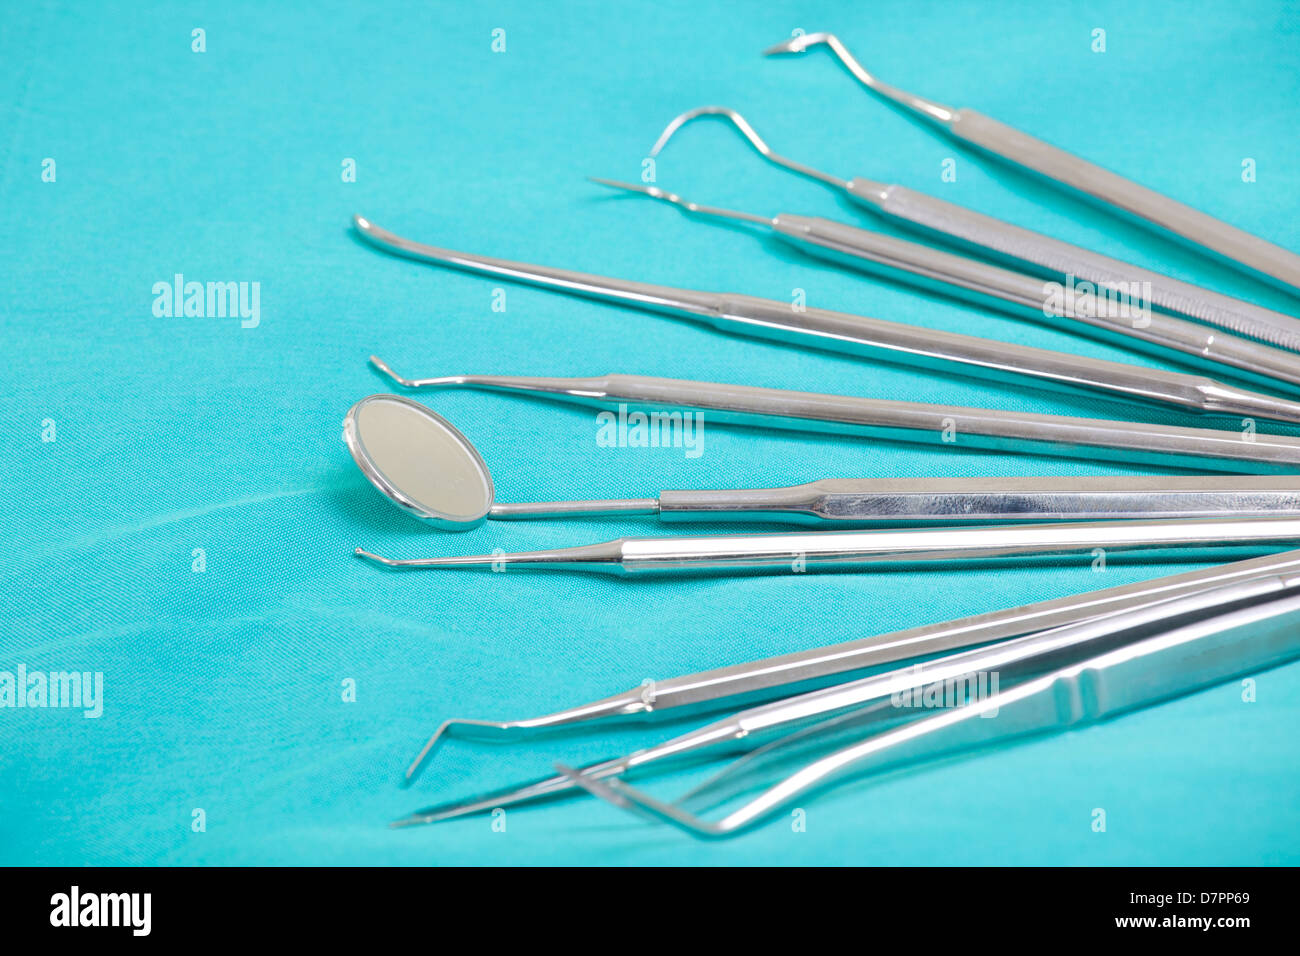 Set of metal medical equipment tools for teeth dental care Stock Photo